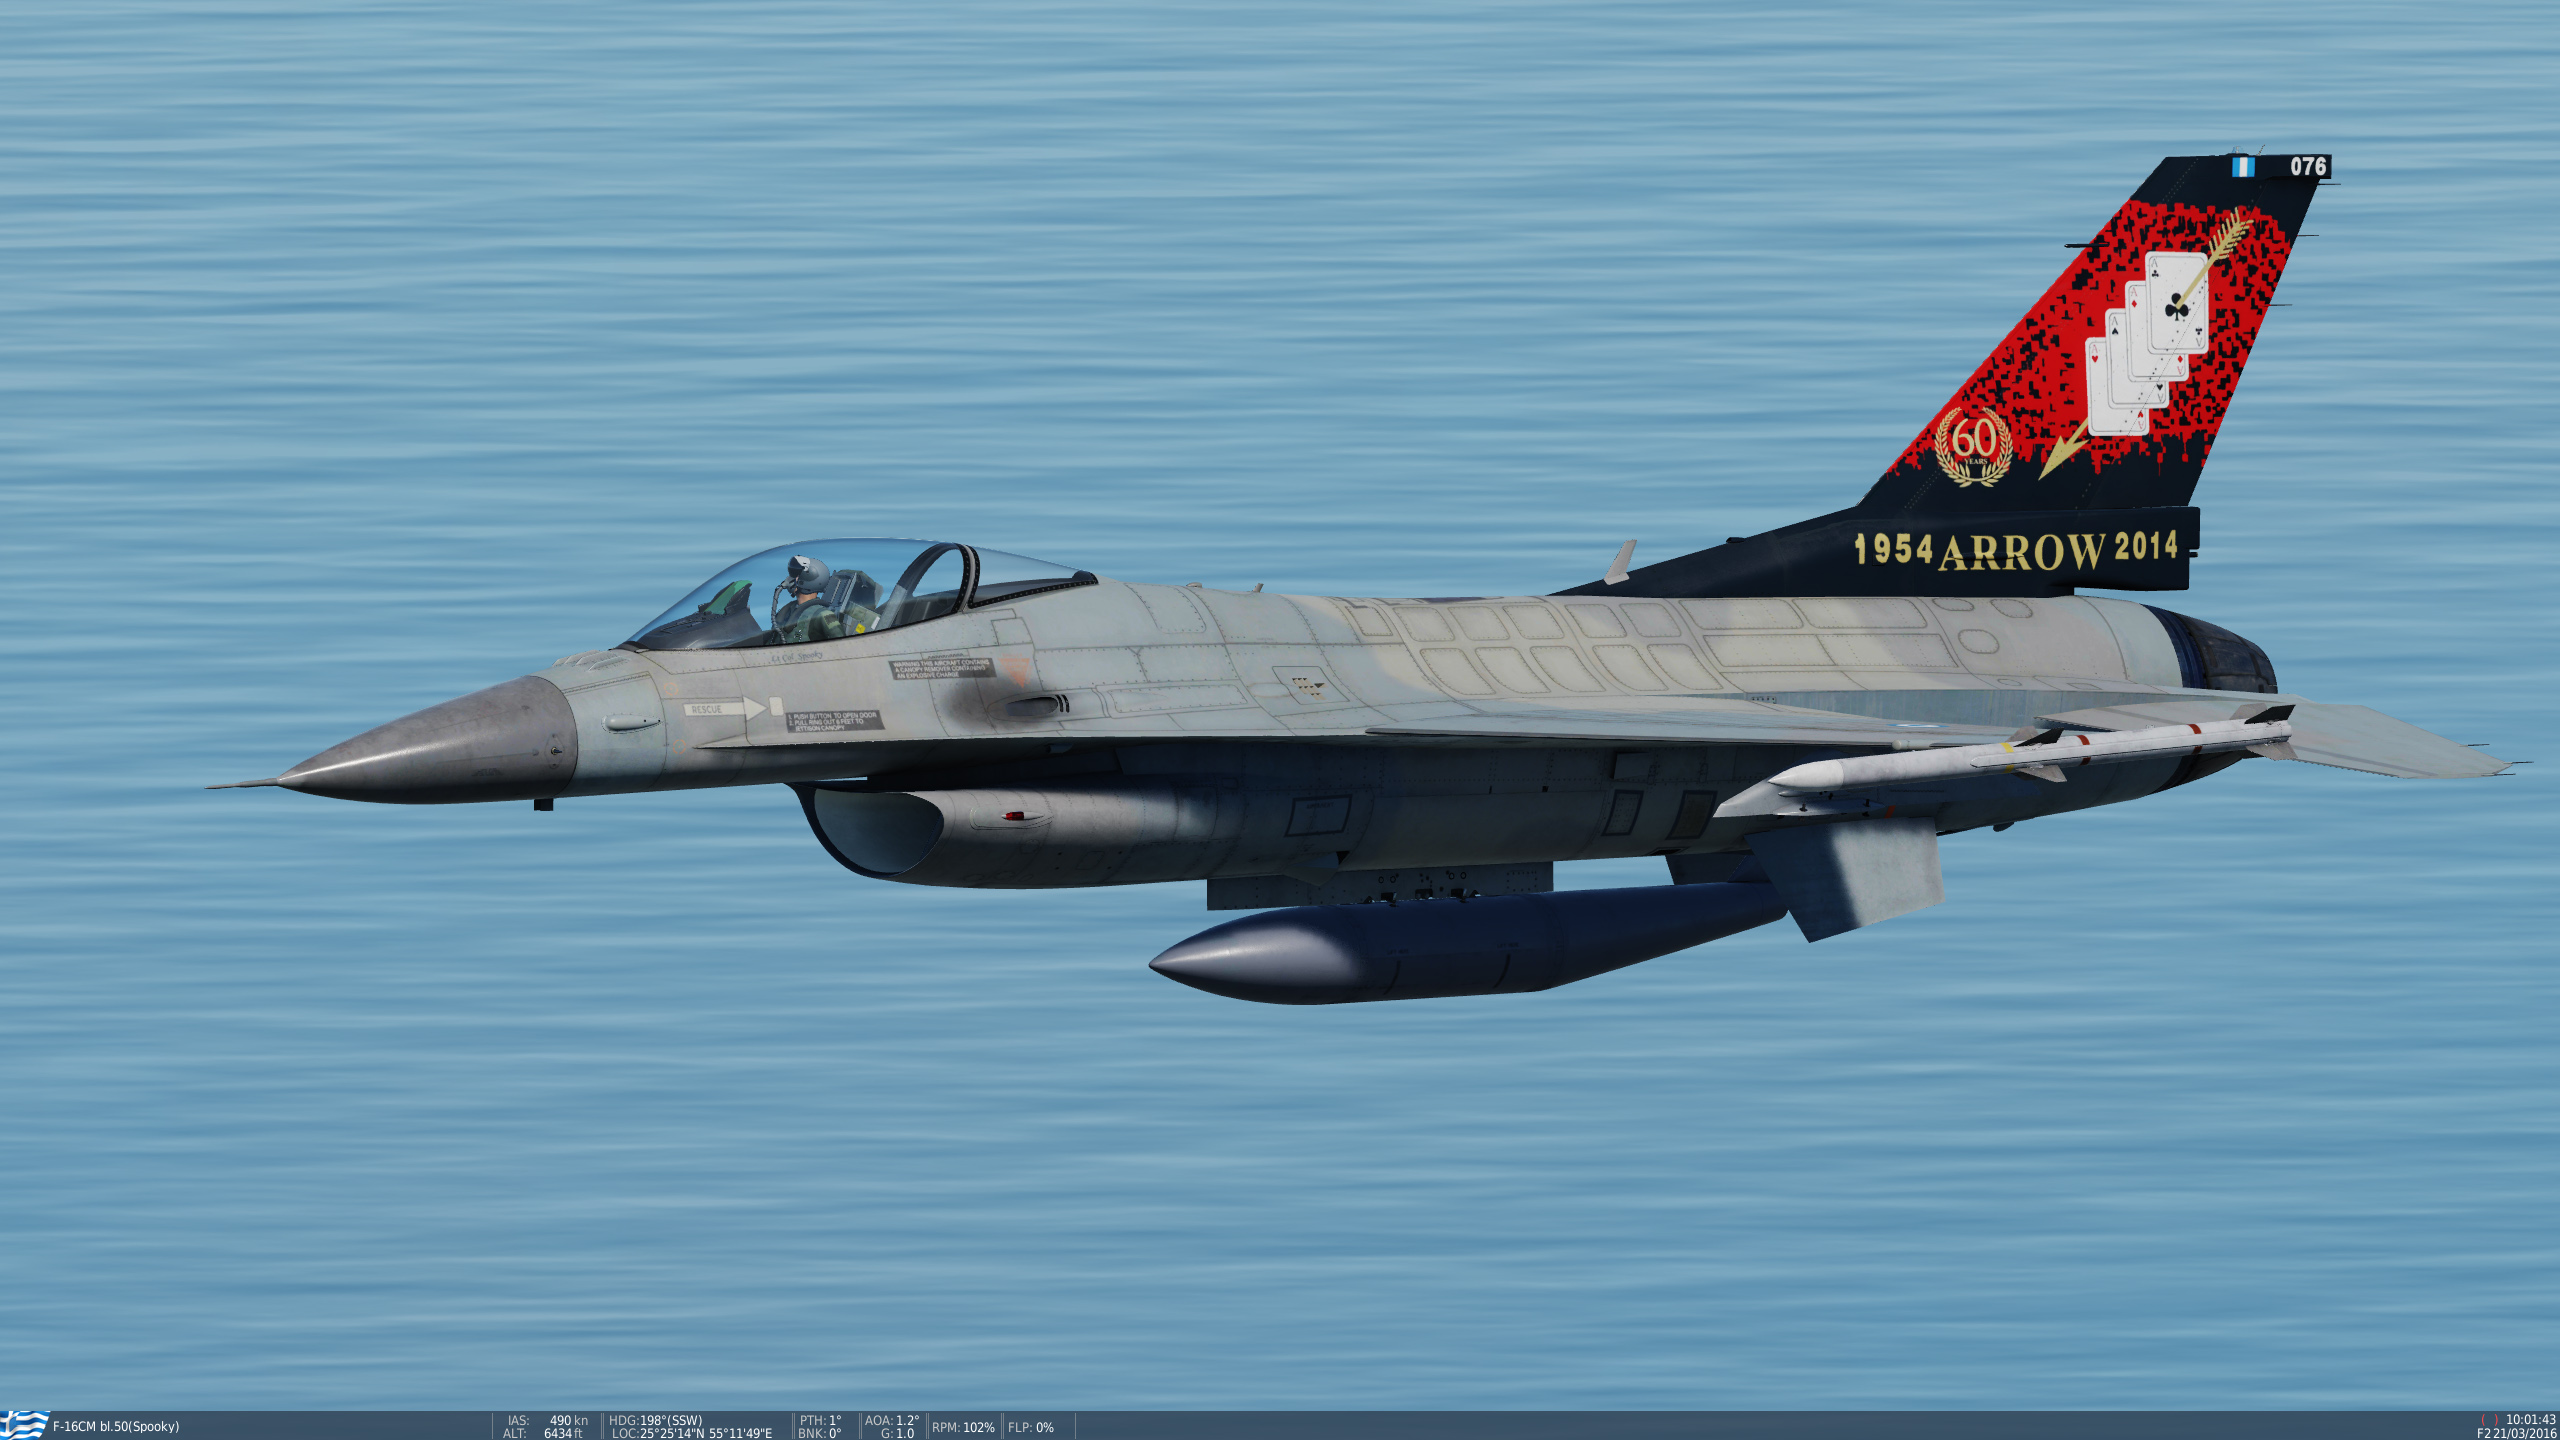 Hellenic Air Force F-16C 341 SQN (60th ANNIVERSARY) **UPDATED**